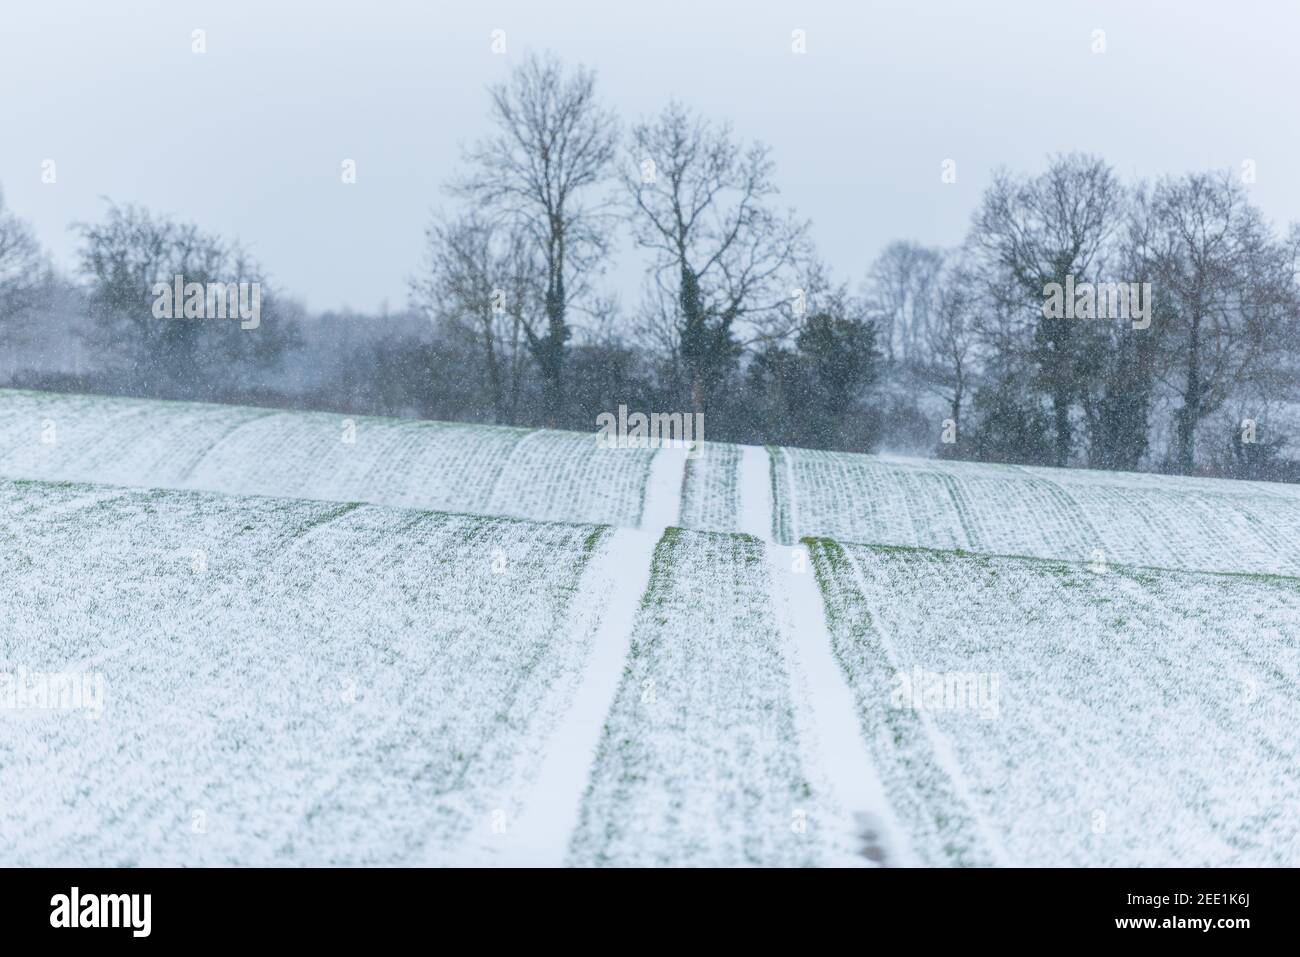 Snowy field with tractor tracks and treeline, Norfolk February, 2021 Stock Photo